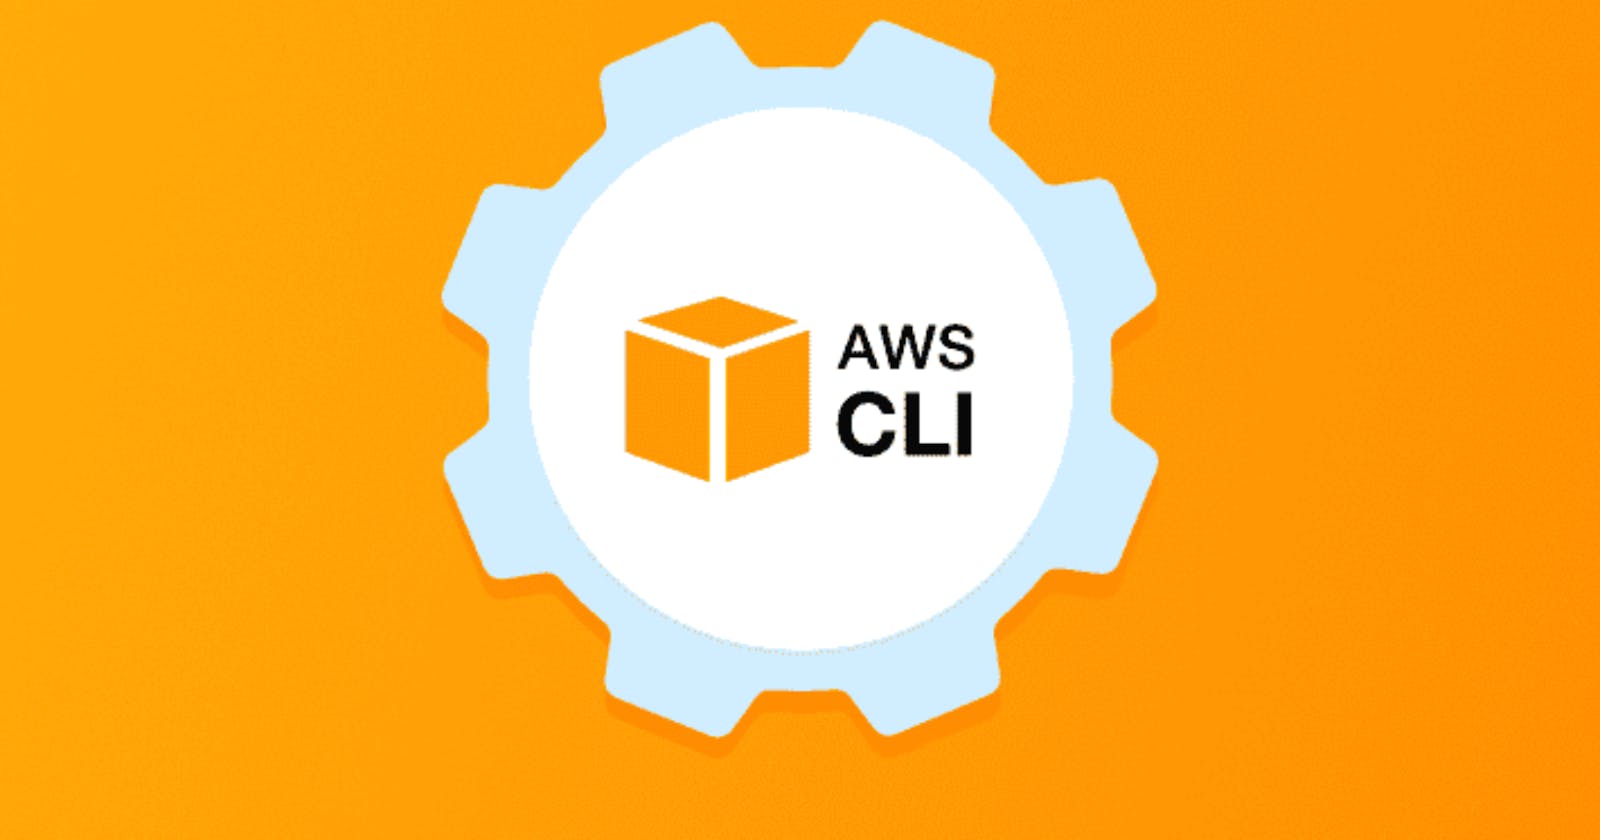 10 Essential AWS CLI Commands Every Cloud Engineer Should Know